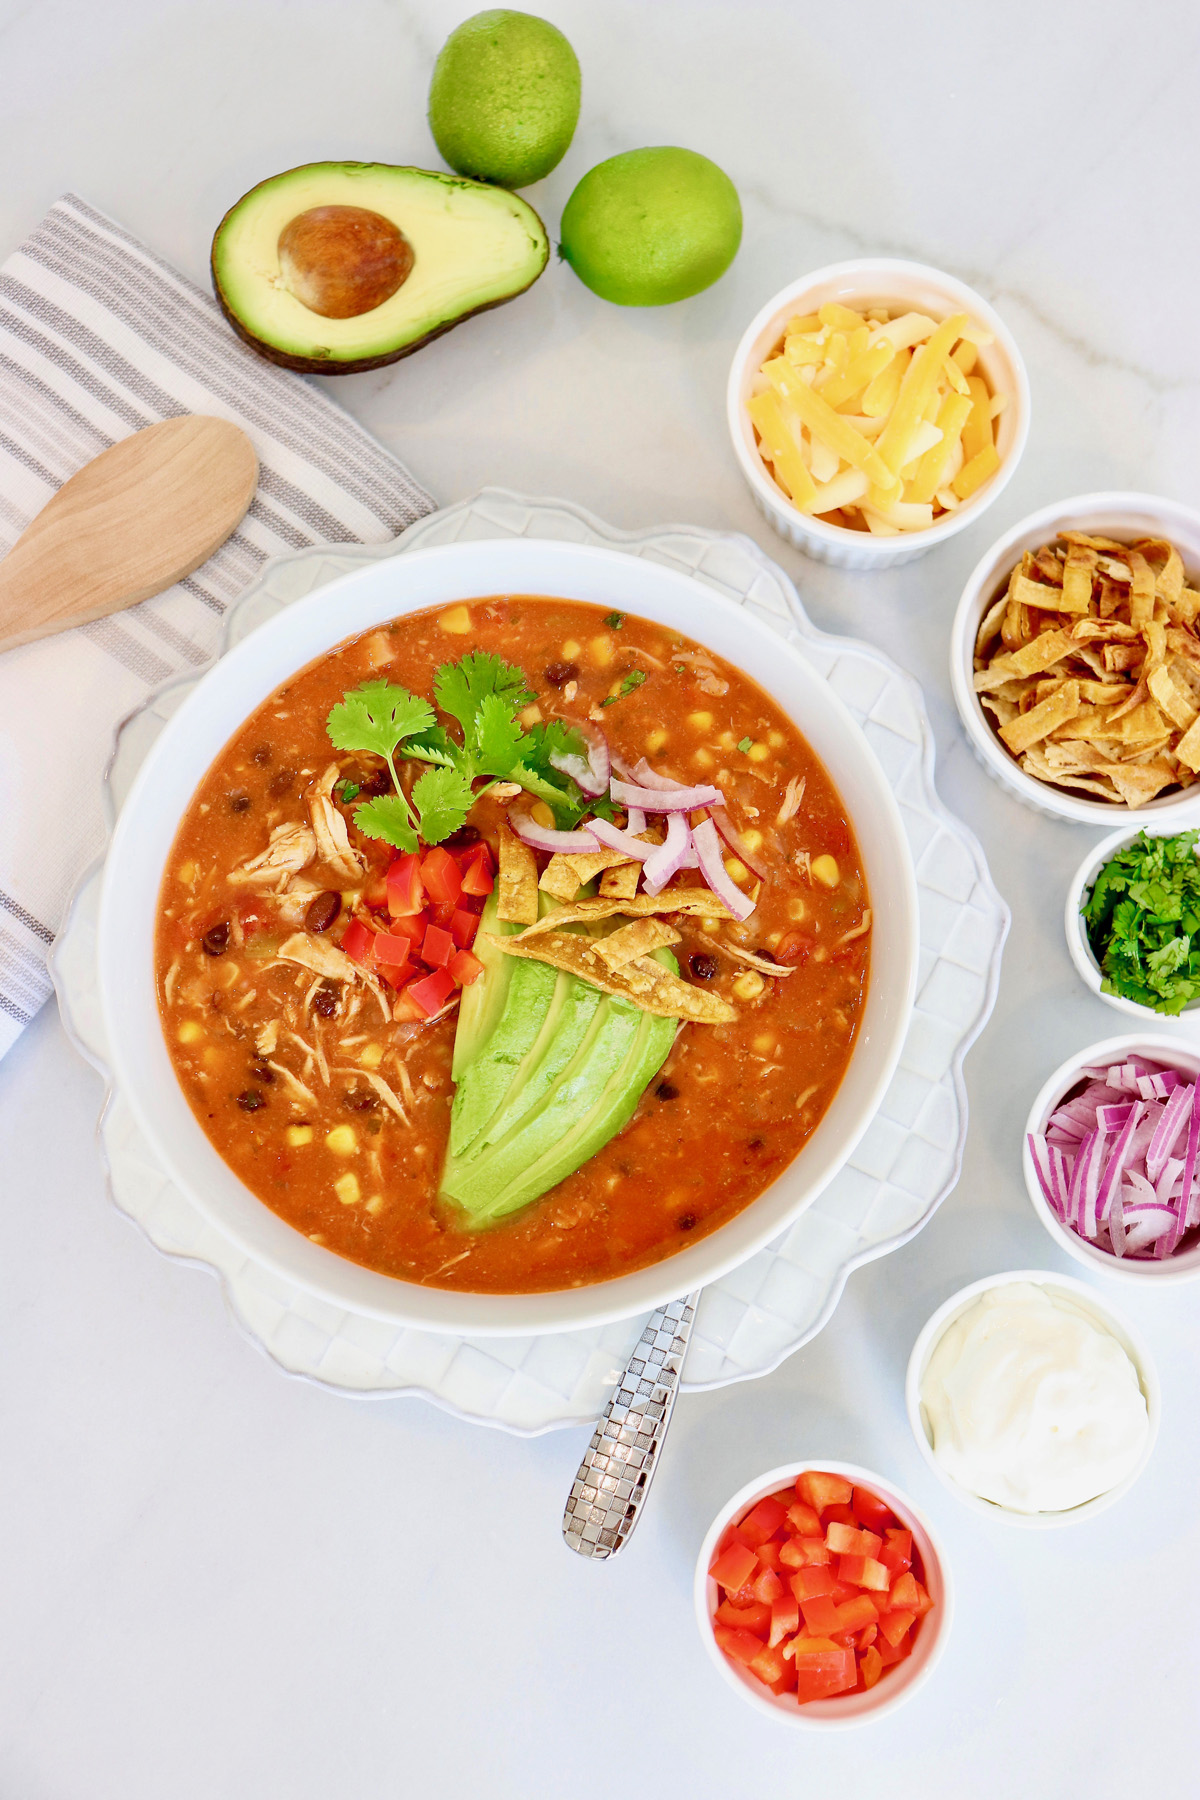 Jeff's chicken tortilla soup recipe is flavorful and easy to make for a last minute quick and easy meal. So delicious!